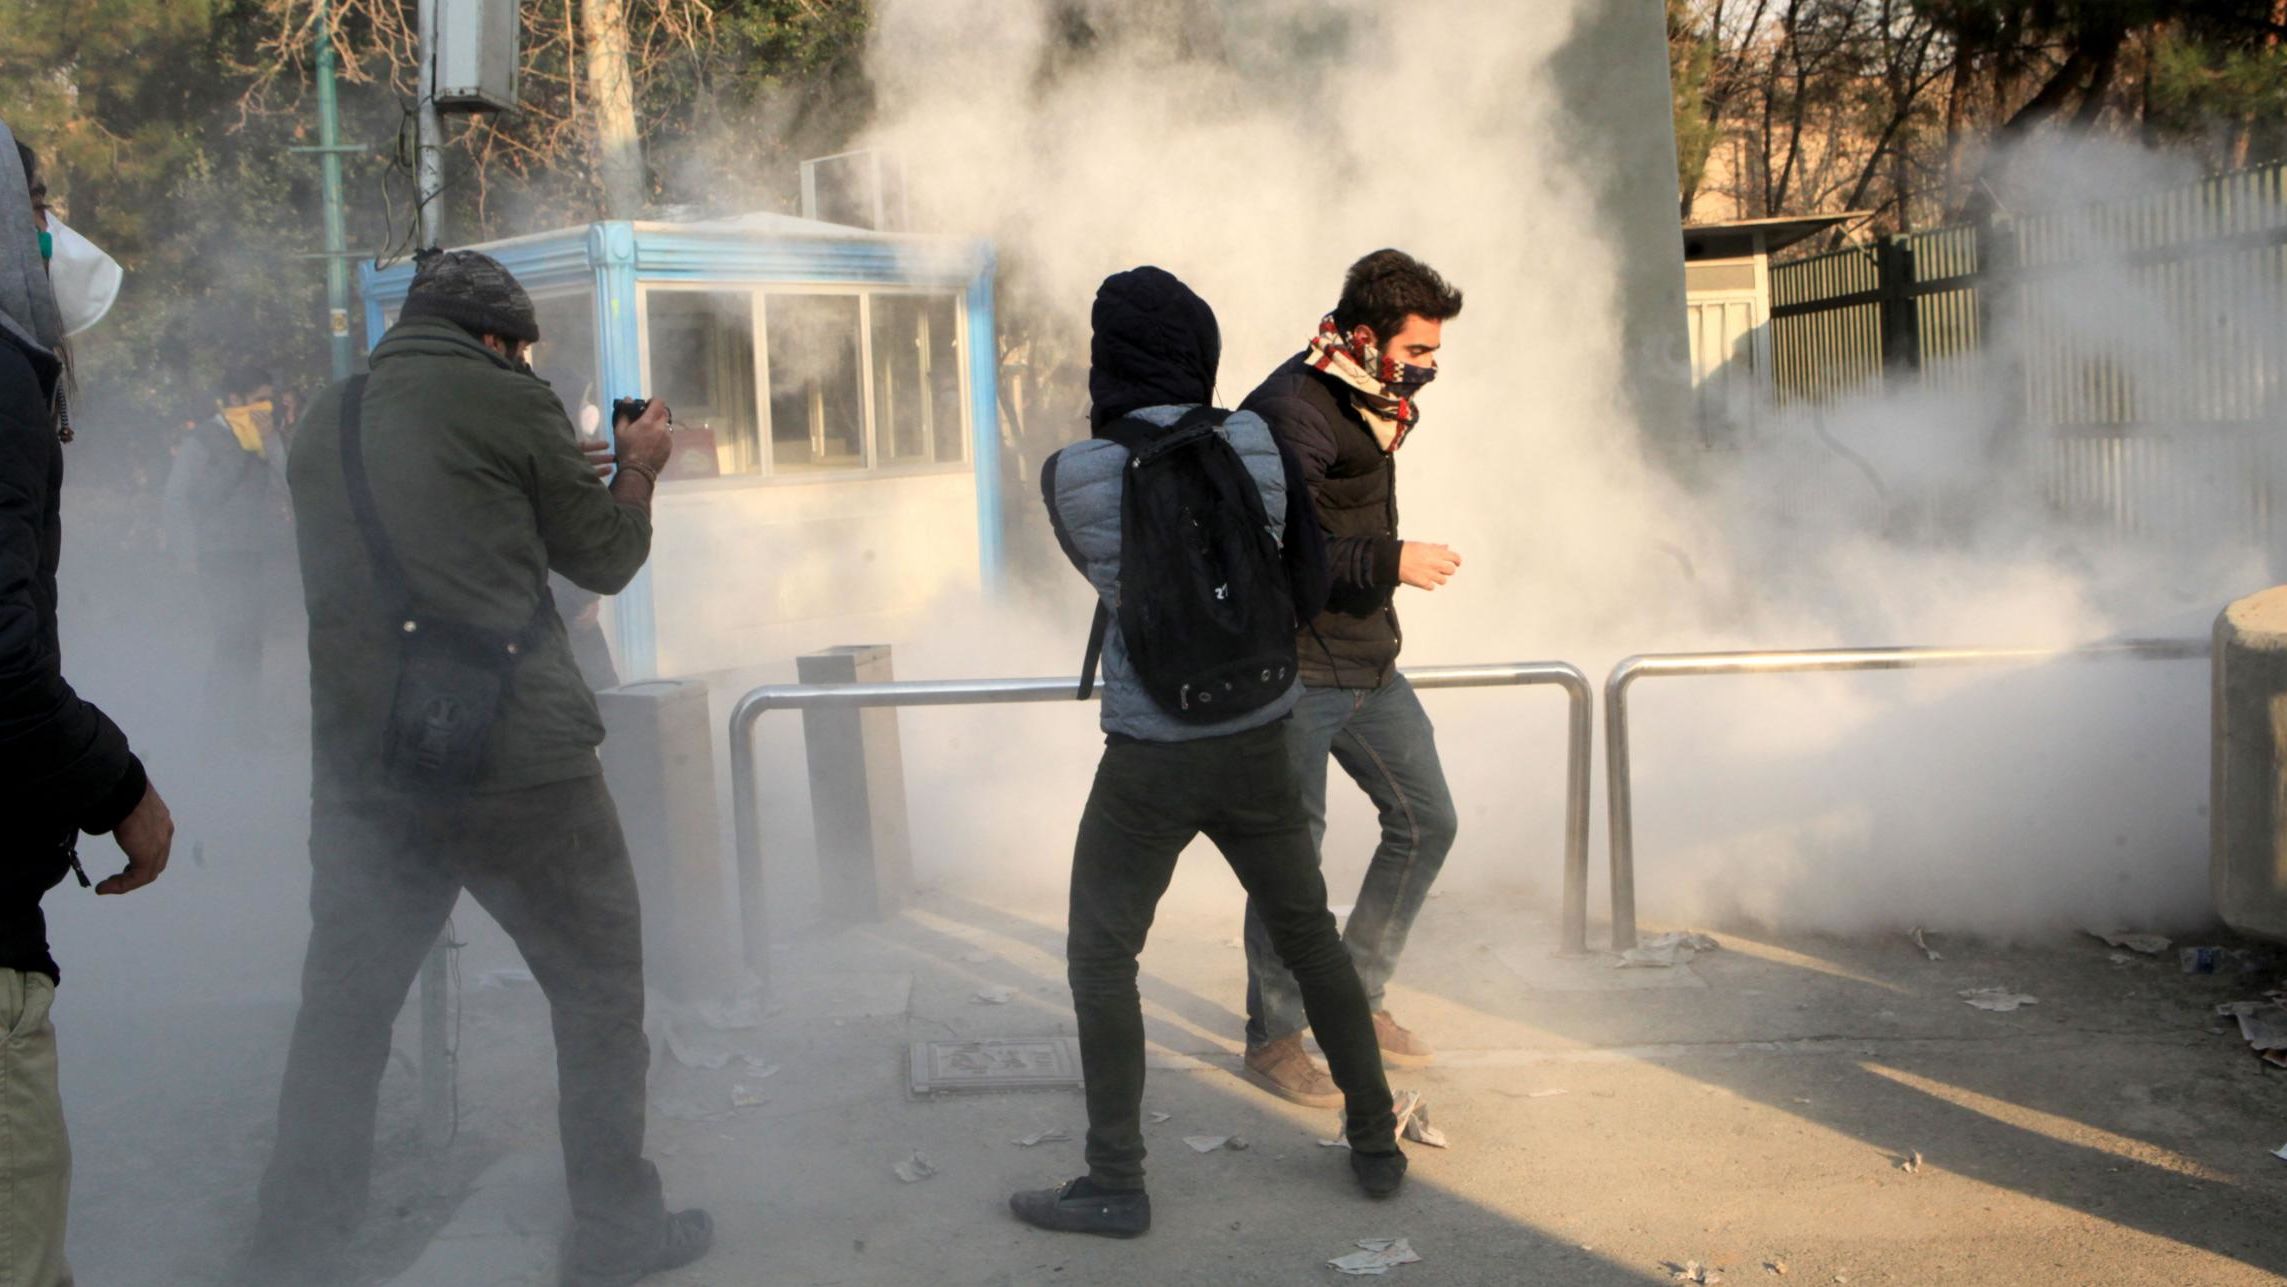 A demonstration at the University of Tehran on Saturday